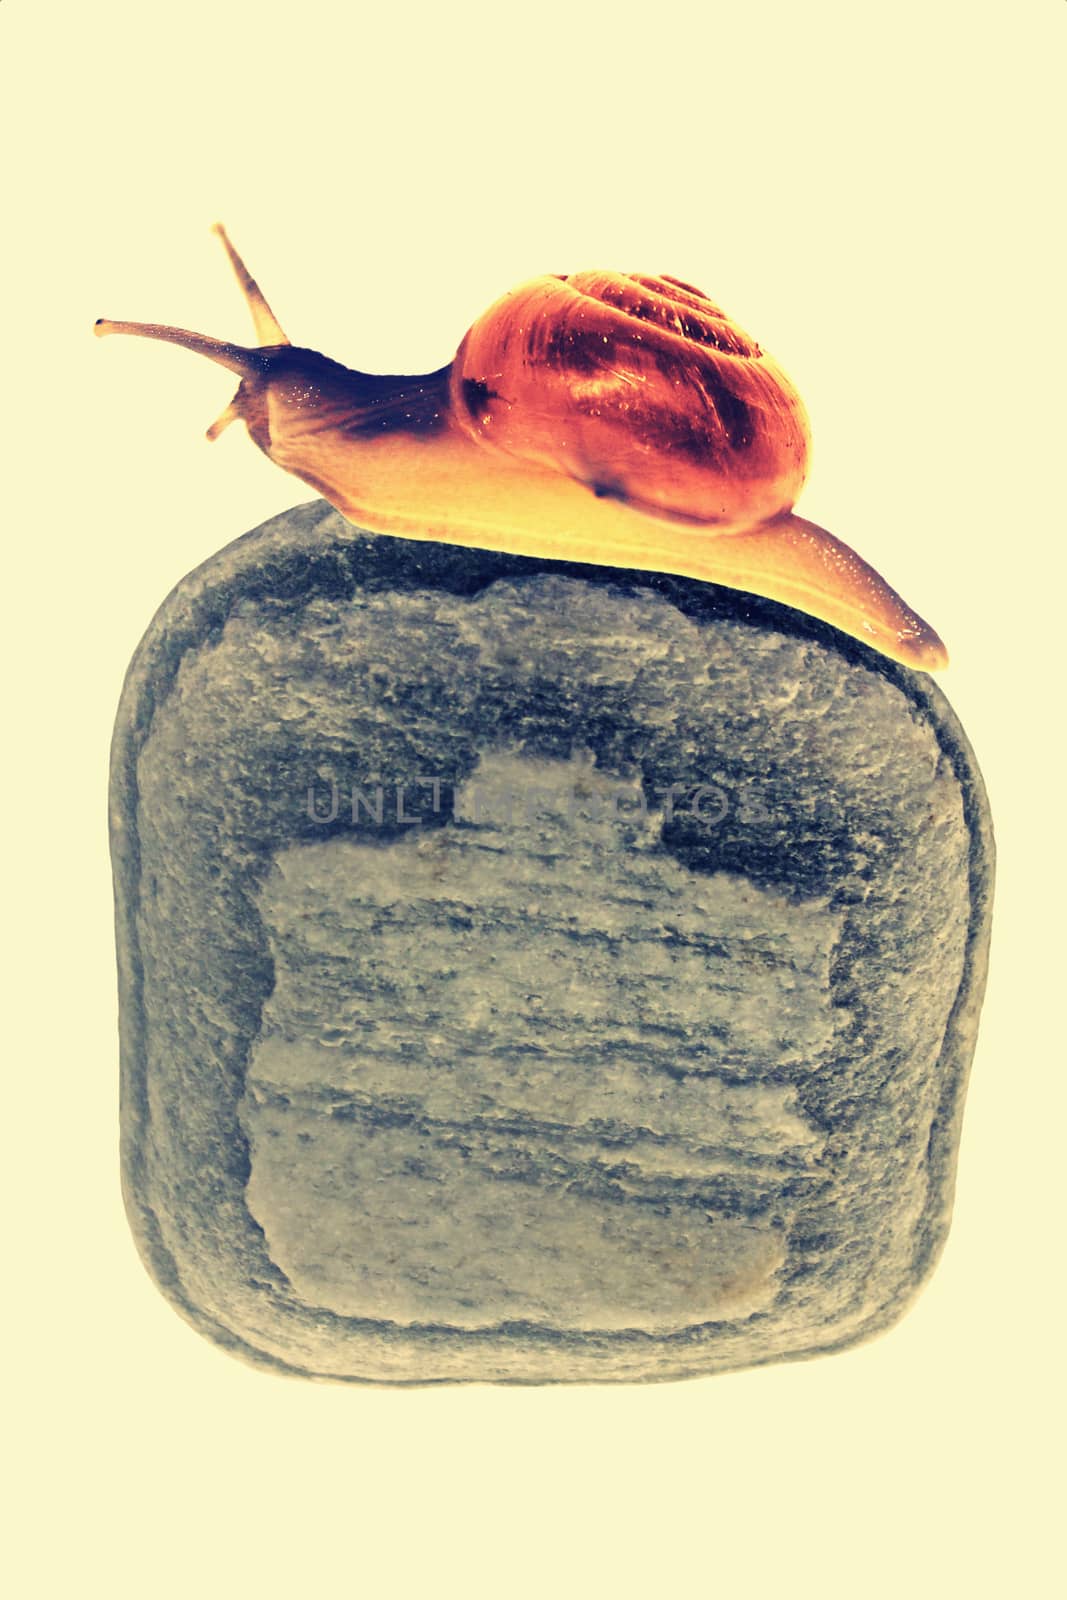 Snail on stone by yands